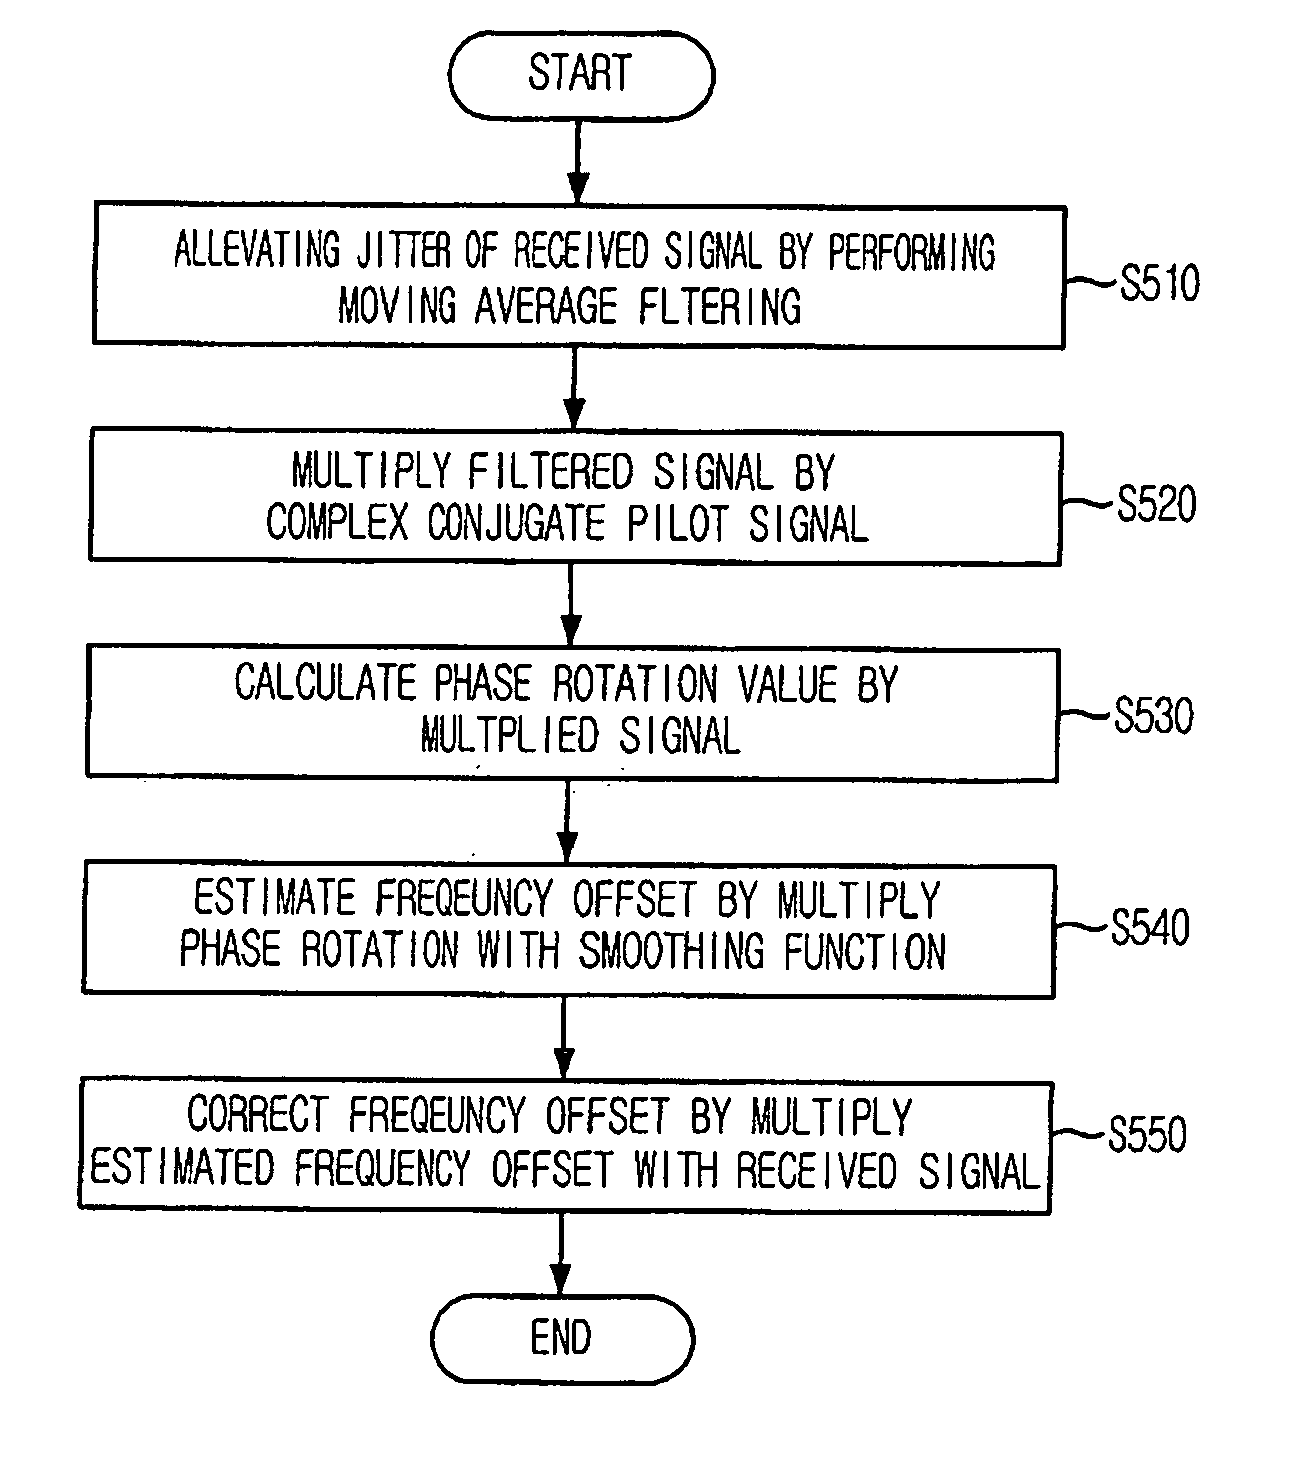 Apparatus for estimating frequency offset from received signal and method for the same